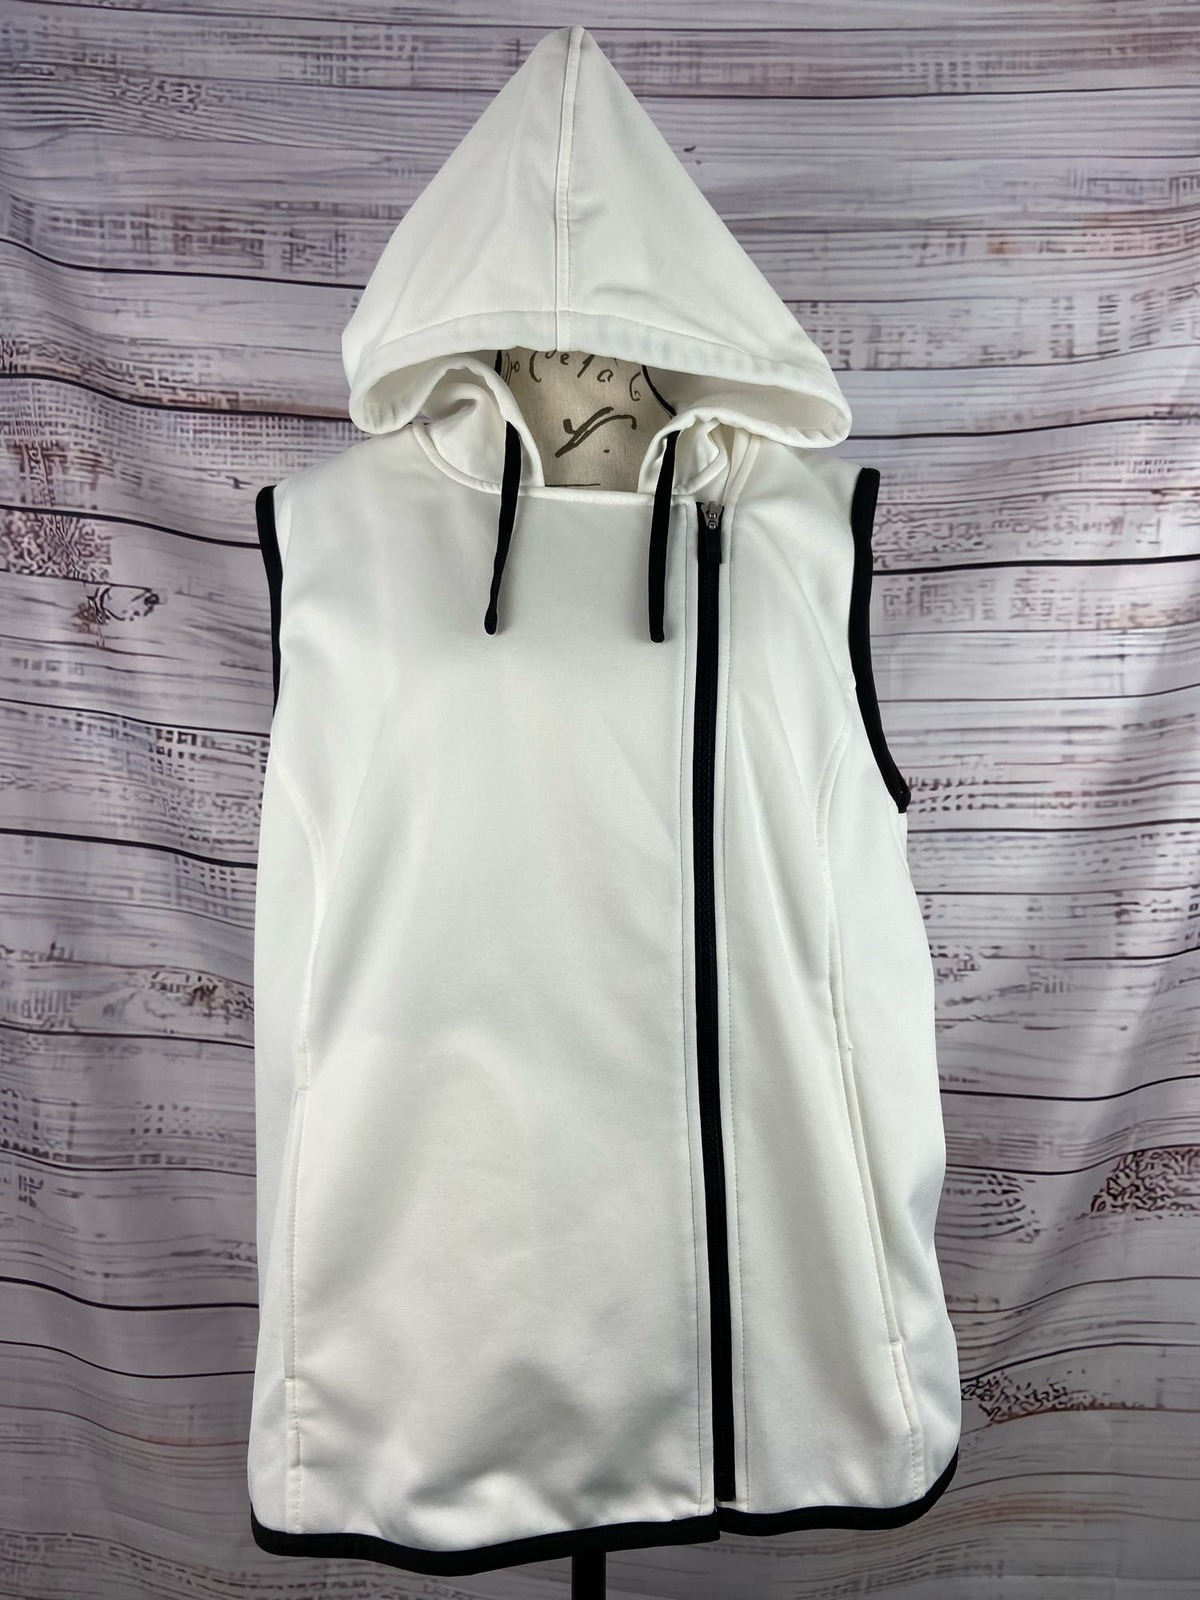 Primary image for Weekends by Chicos 3 Zip Up Moto Vest Womens XL Hooded Fleece Lined Pocket White